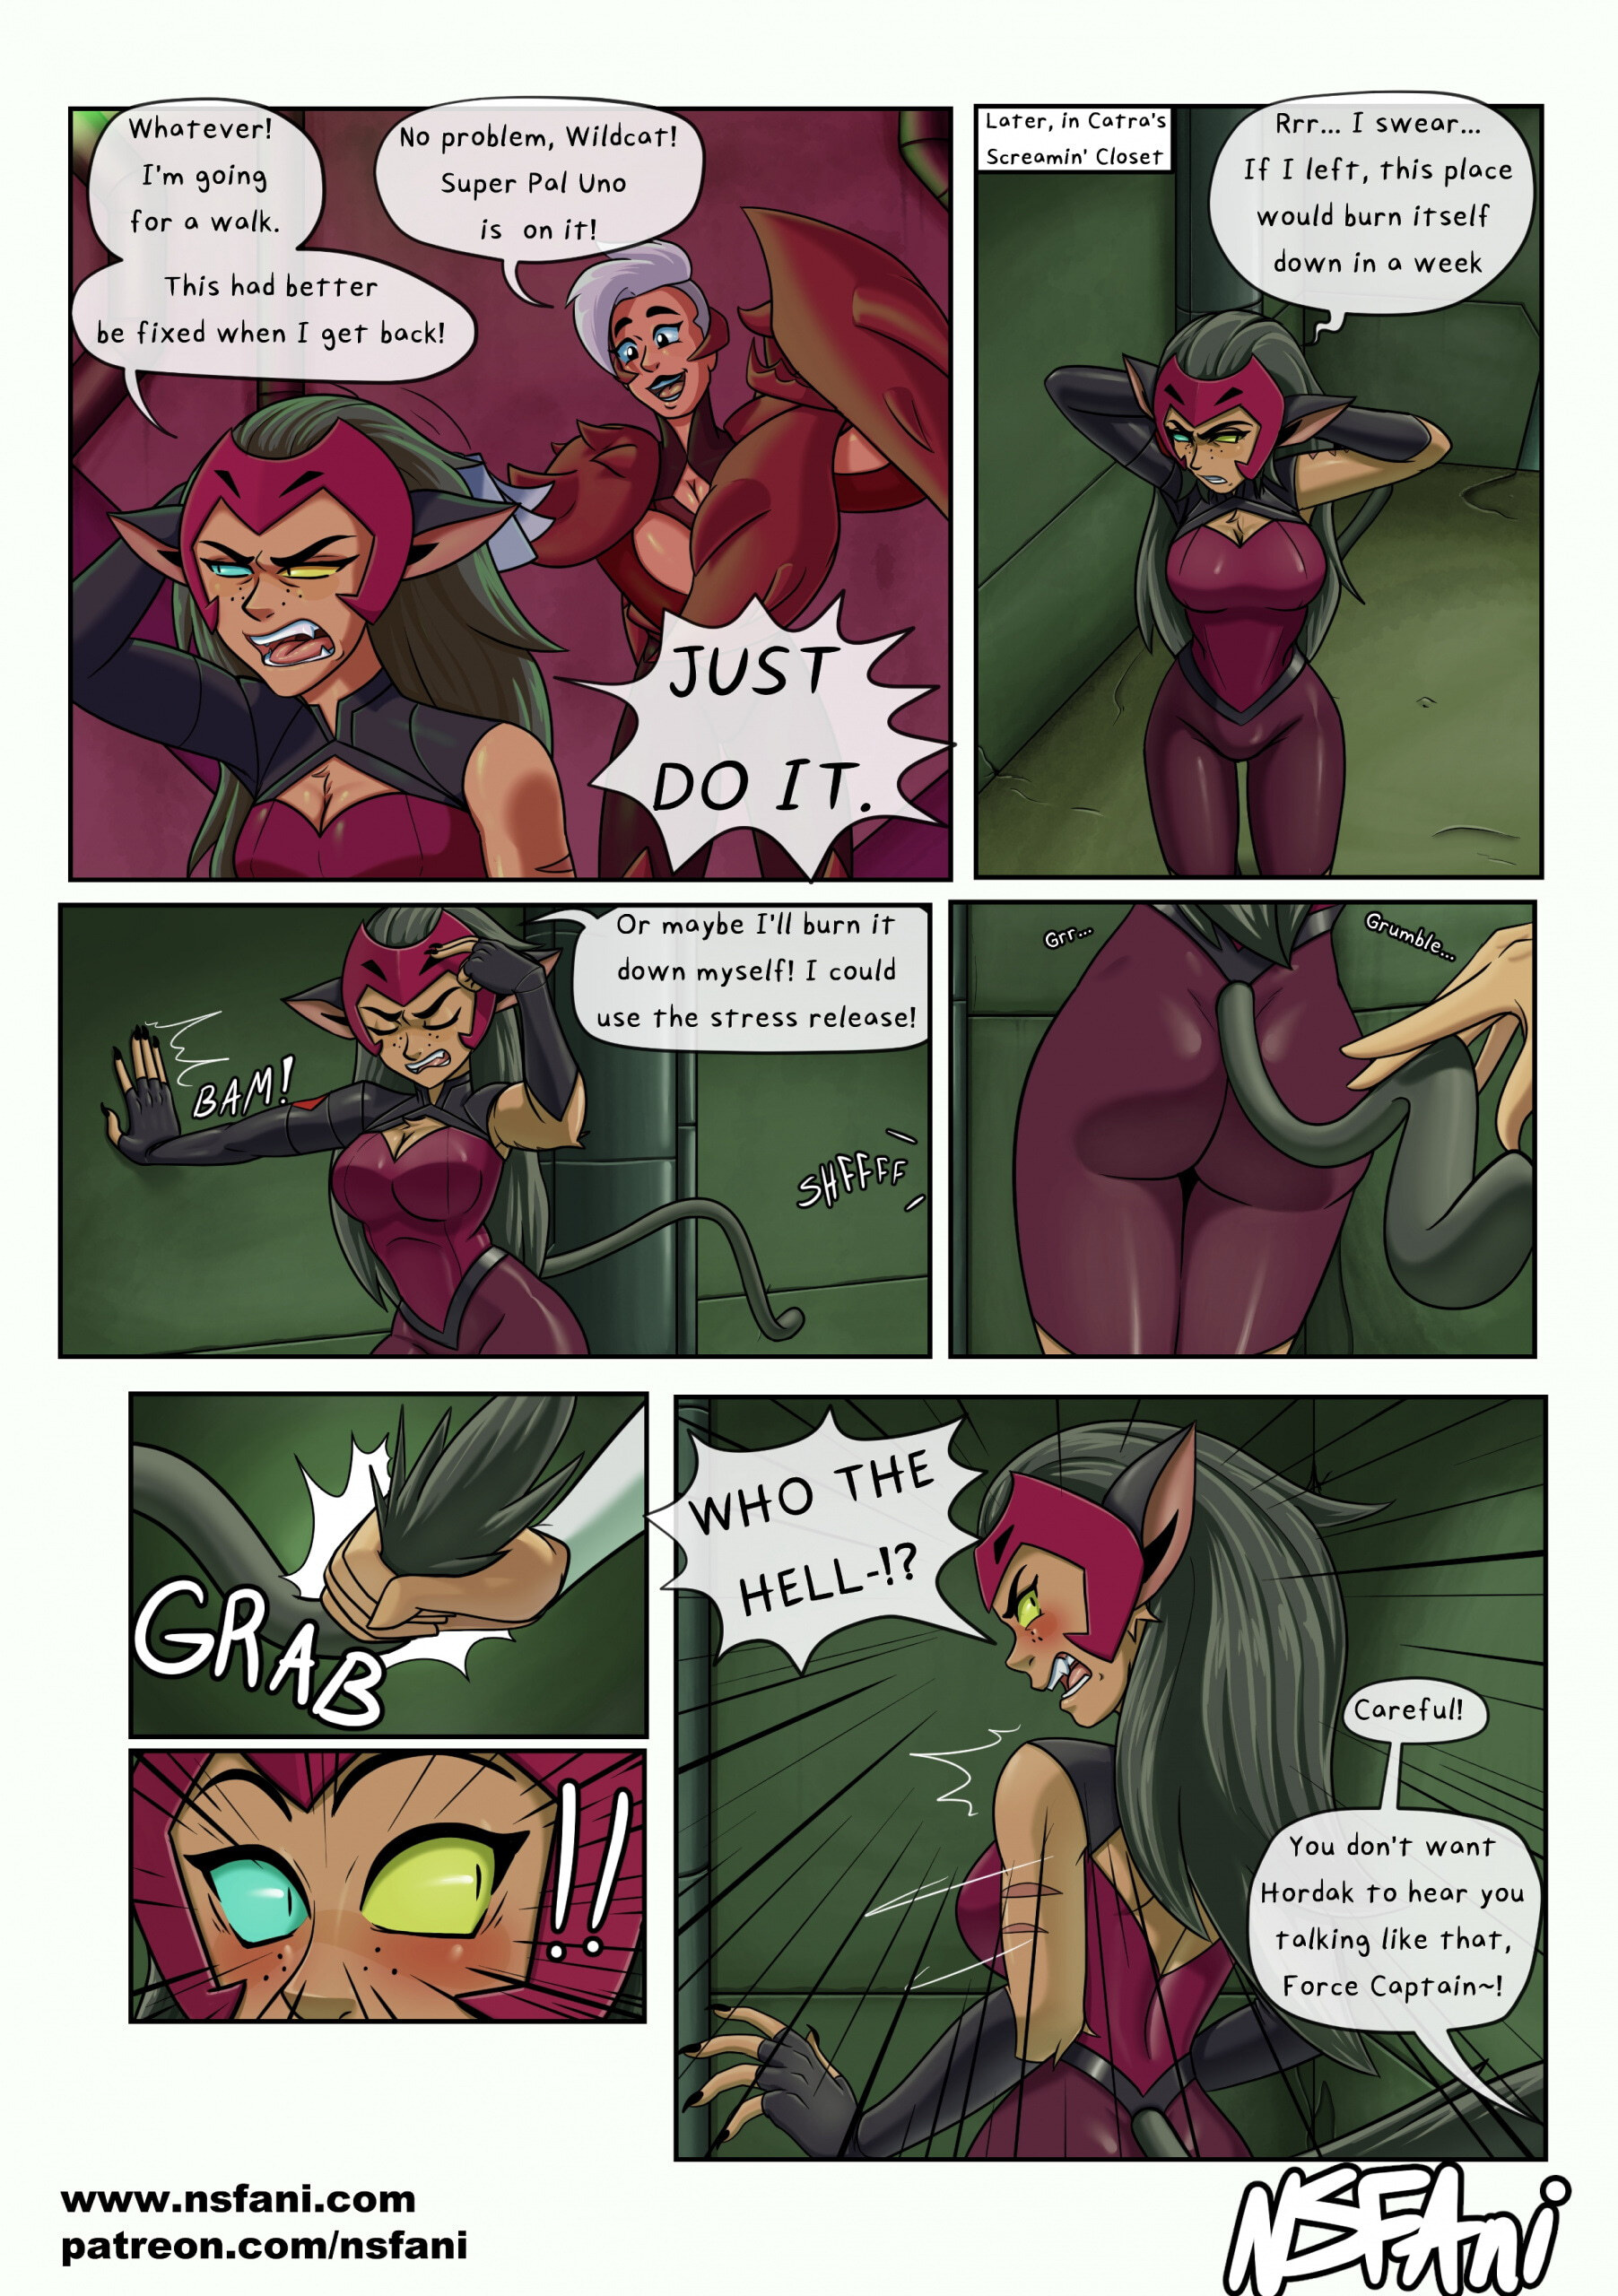 Scratching the Itch - Page 2